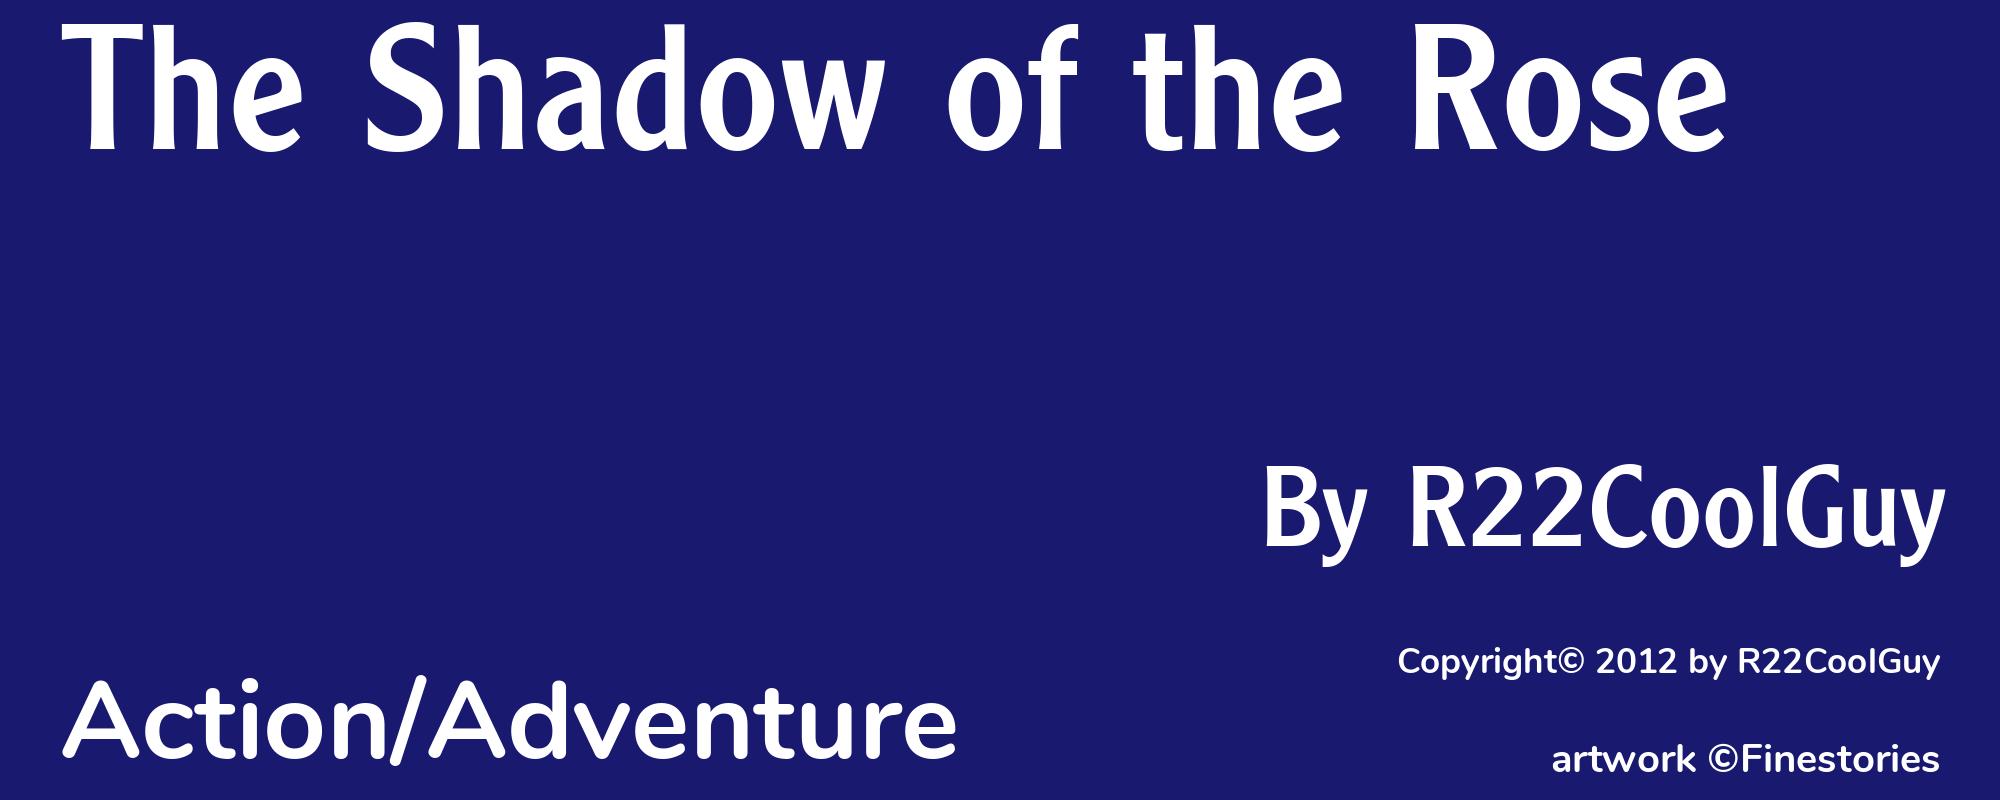 The Shadow of the Rose - Cover